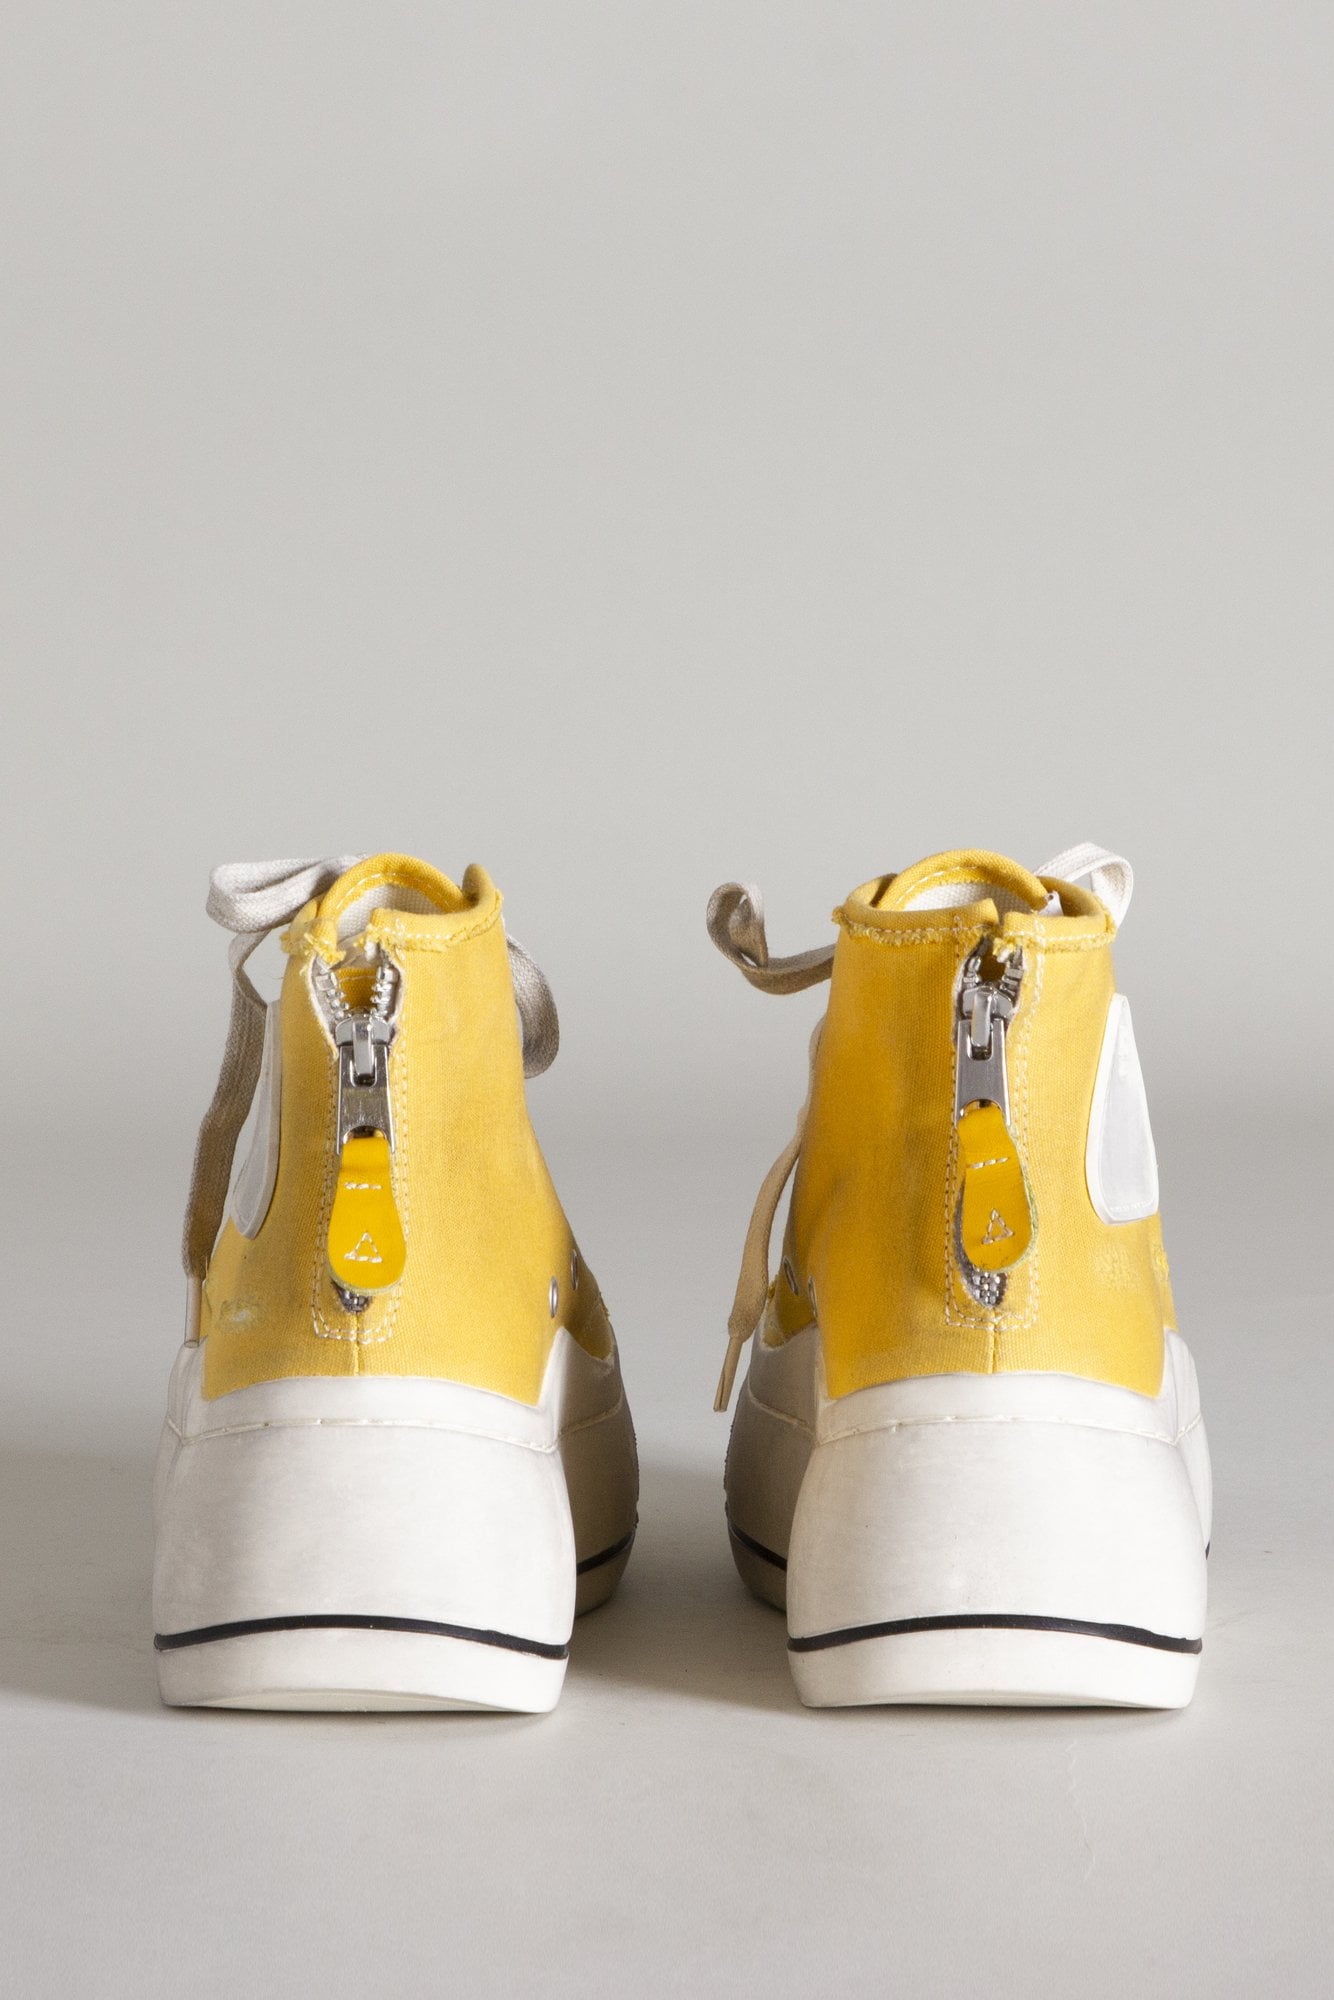 Shop Vintage High Top Sneakers in USA – Drop Top Company